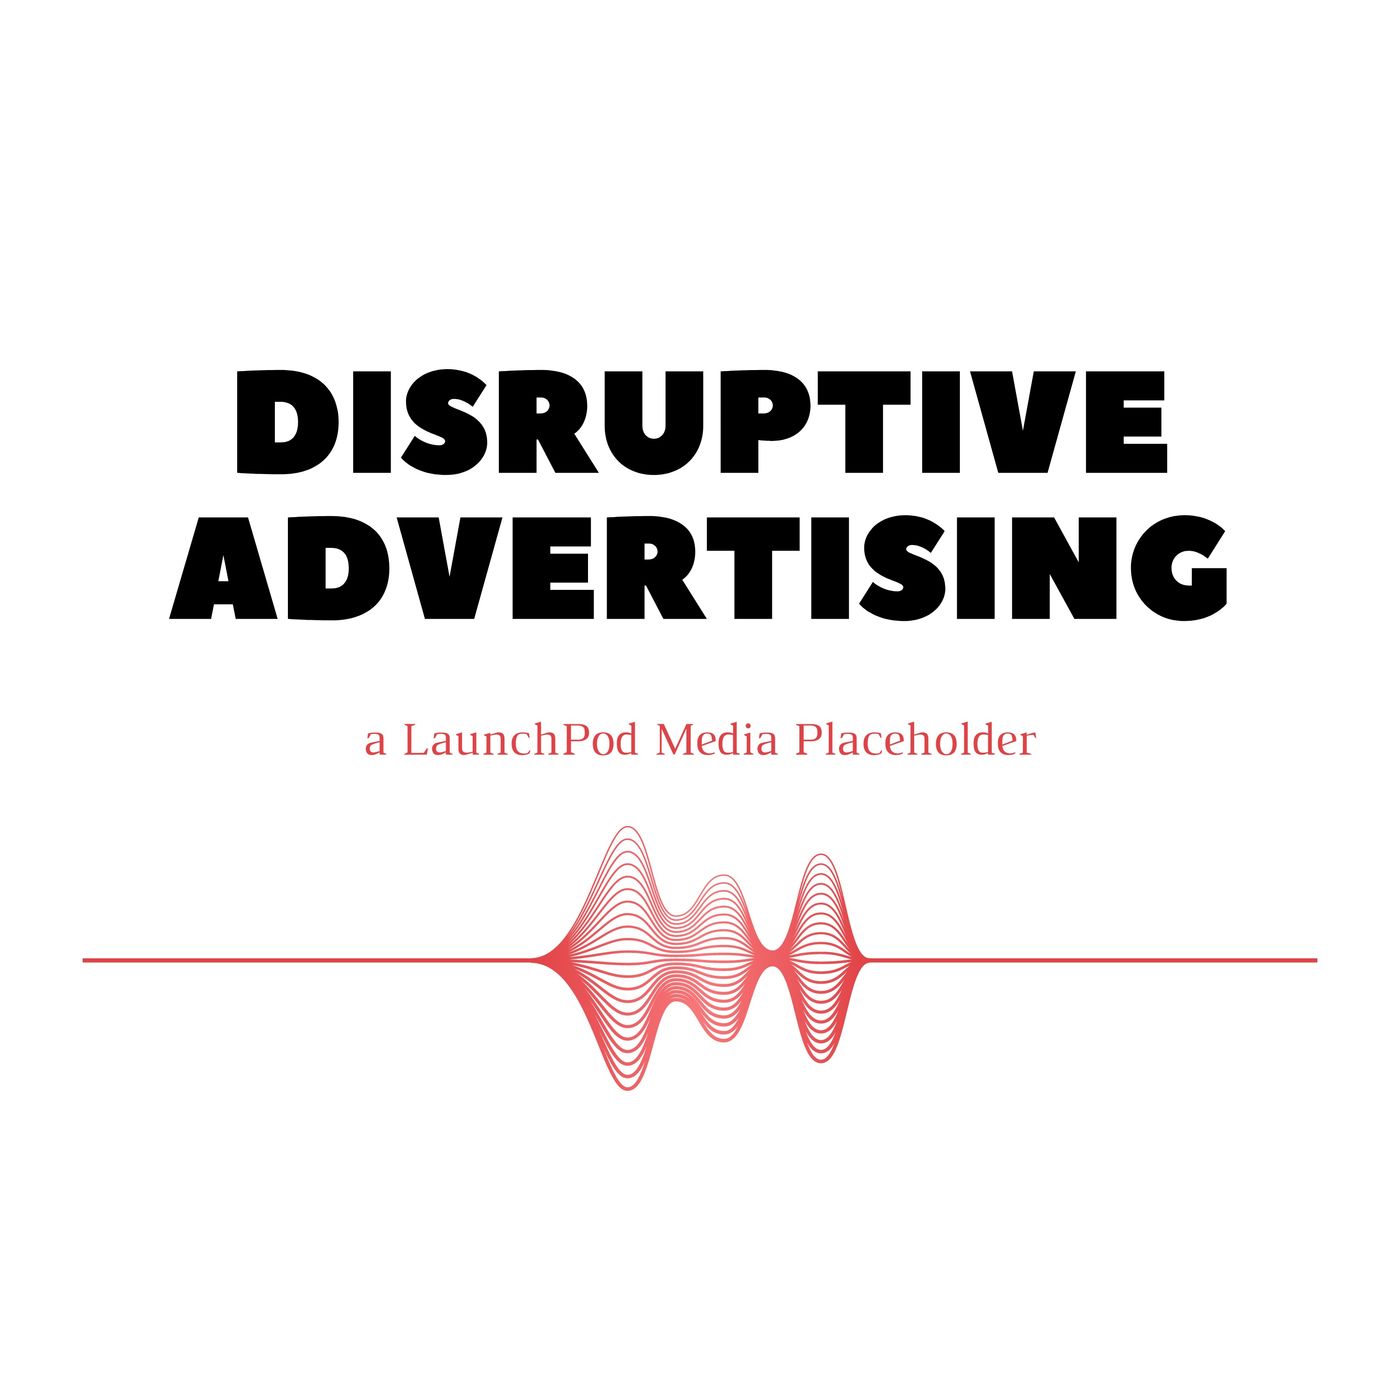 The DISRUPTIVE ADVERTISING Podcast